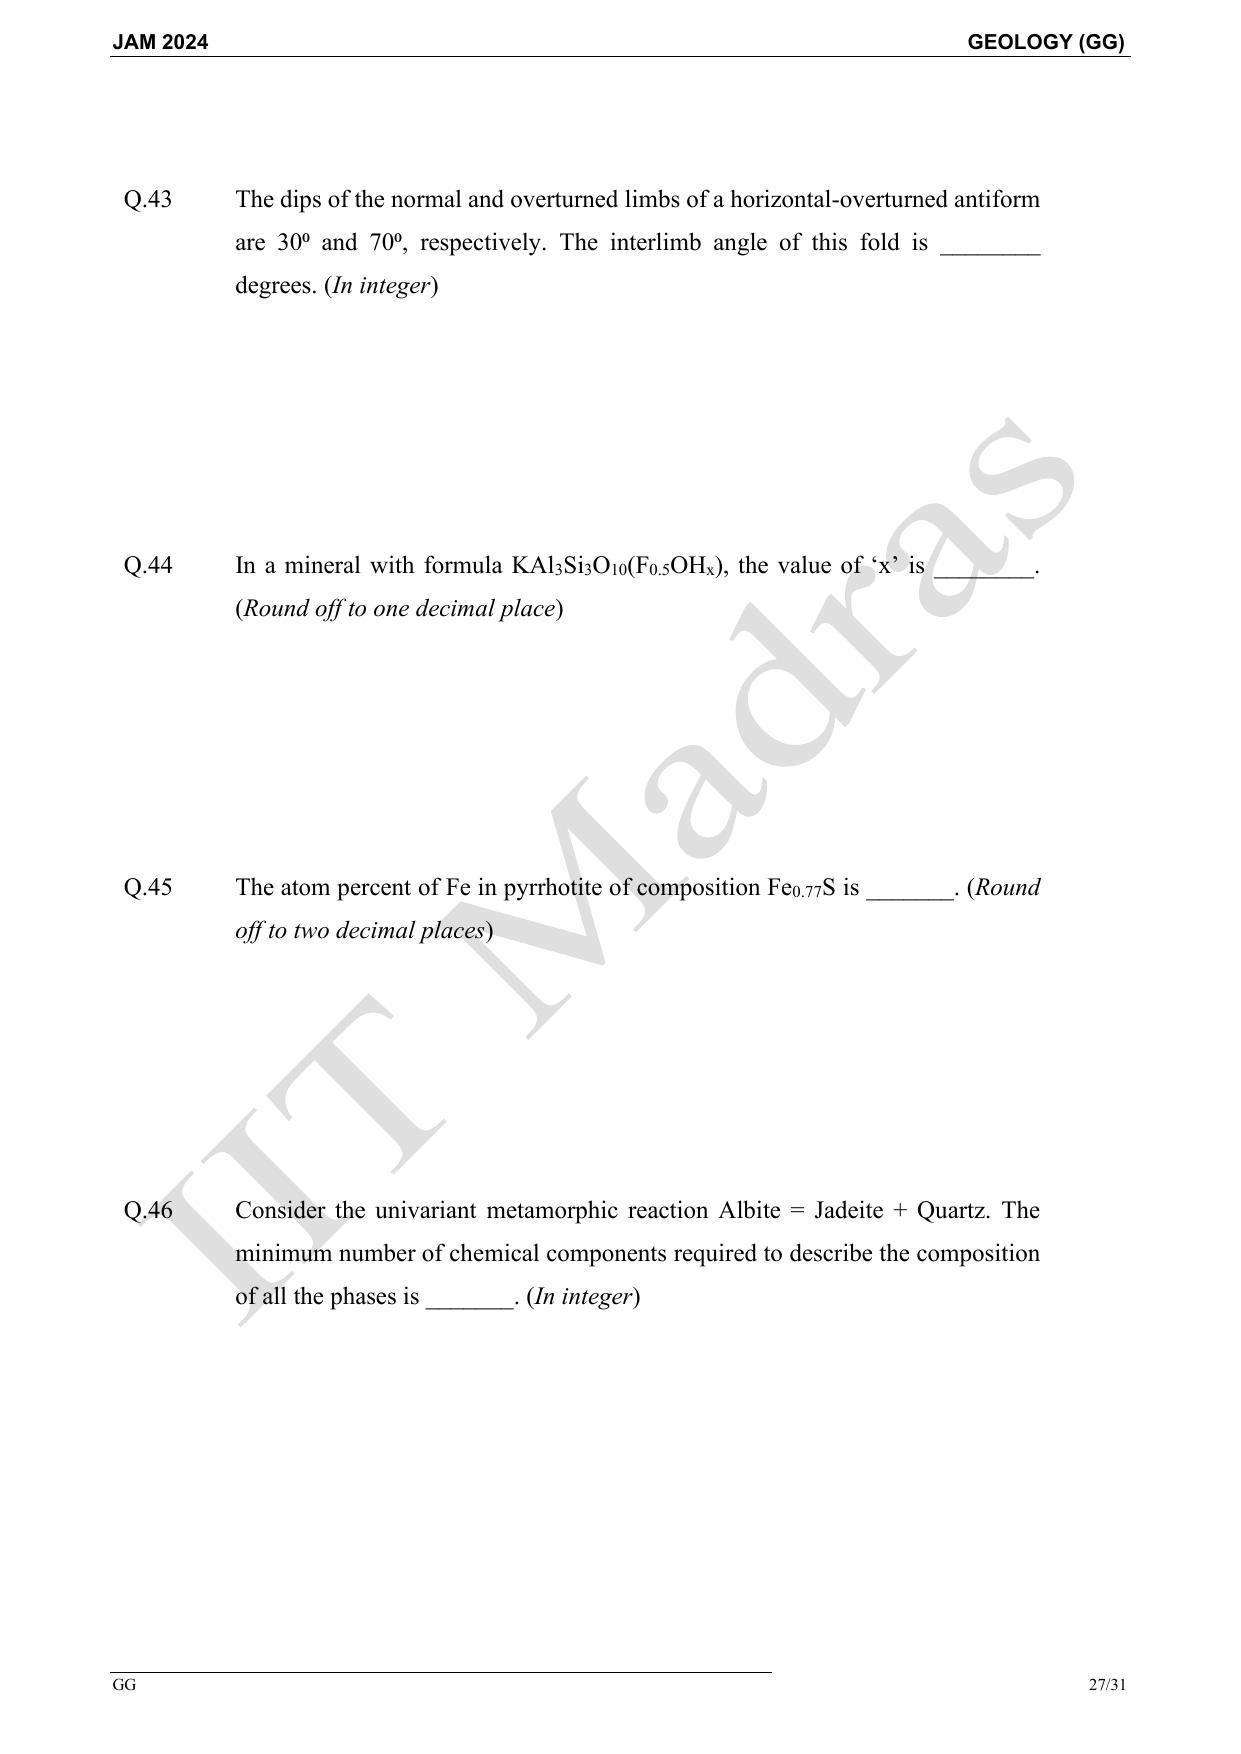 IIT JAM 2024 Geology (GG) Master Question Paper - Page 27